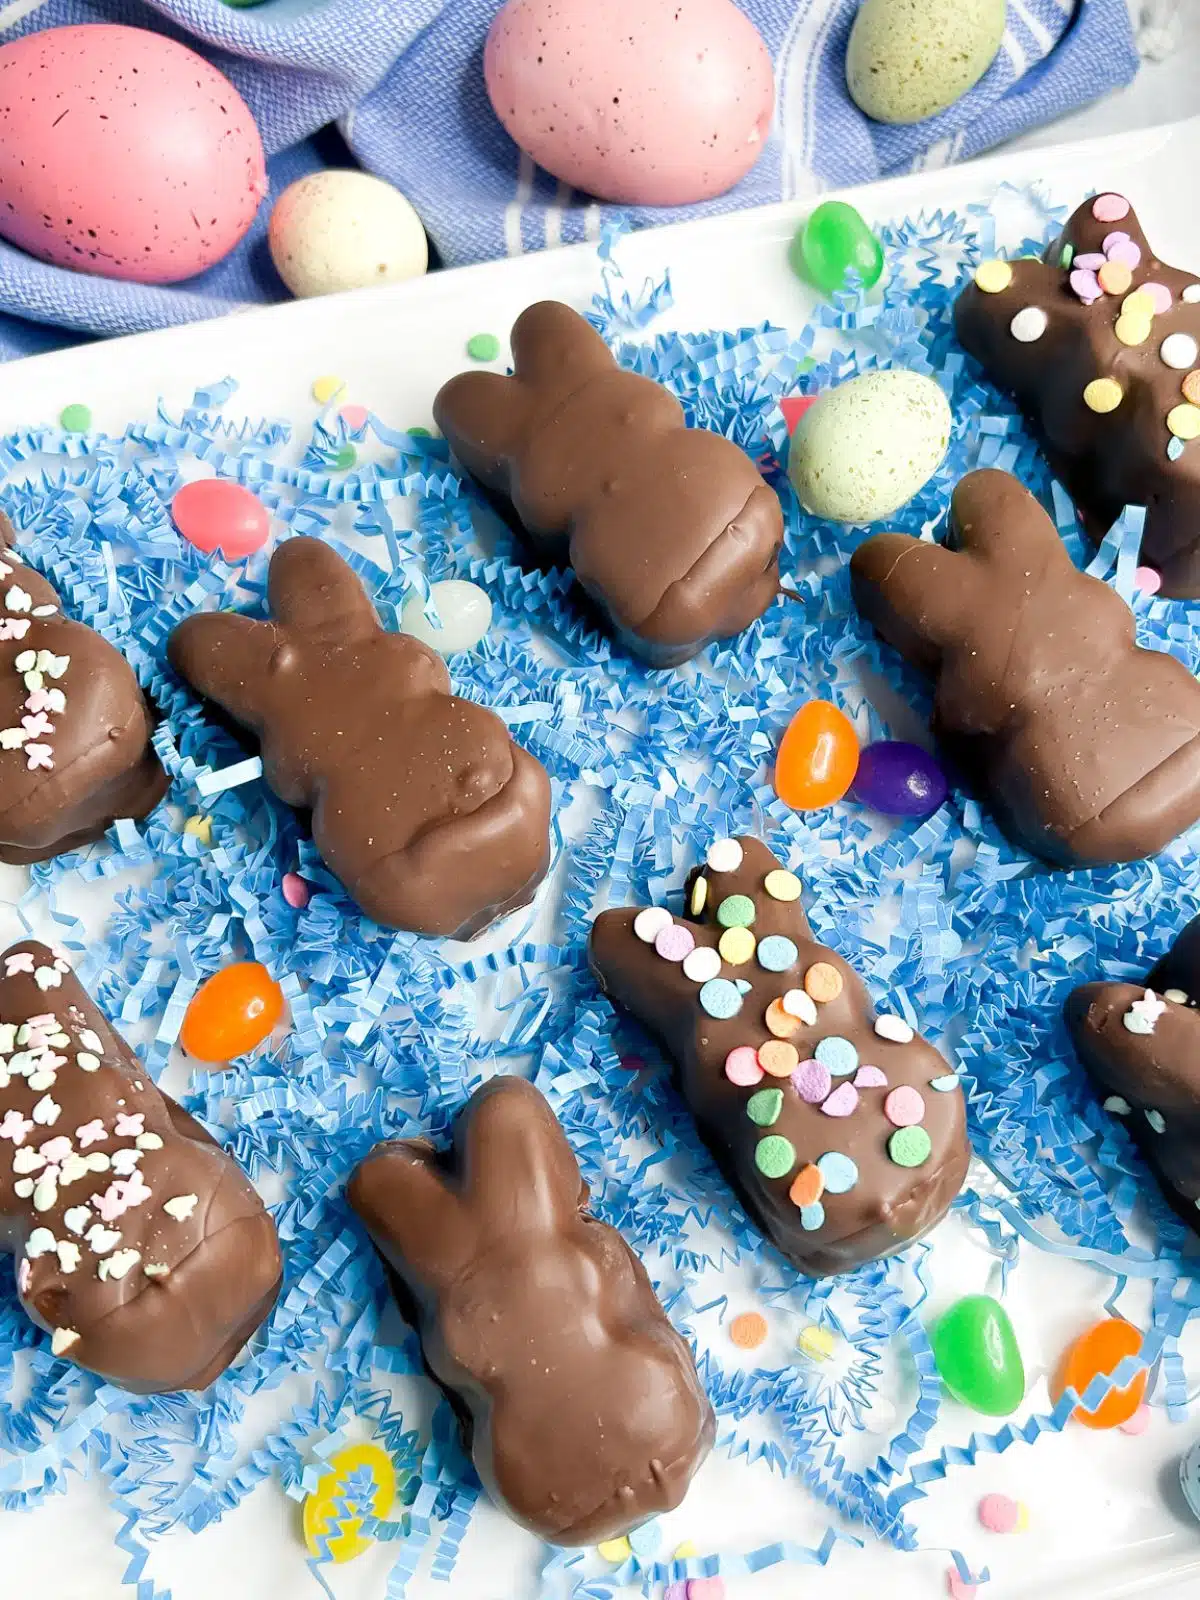 Plate full of chocolate dipped marshmallow Peeps with blue confetti.